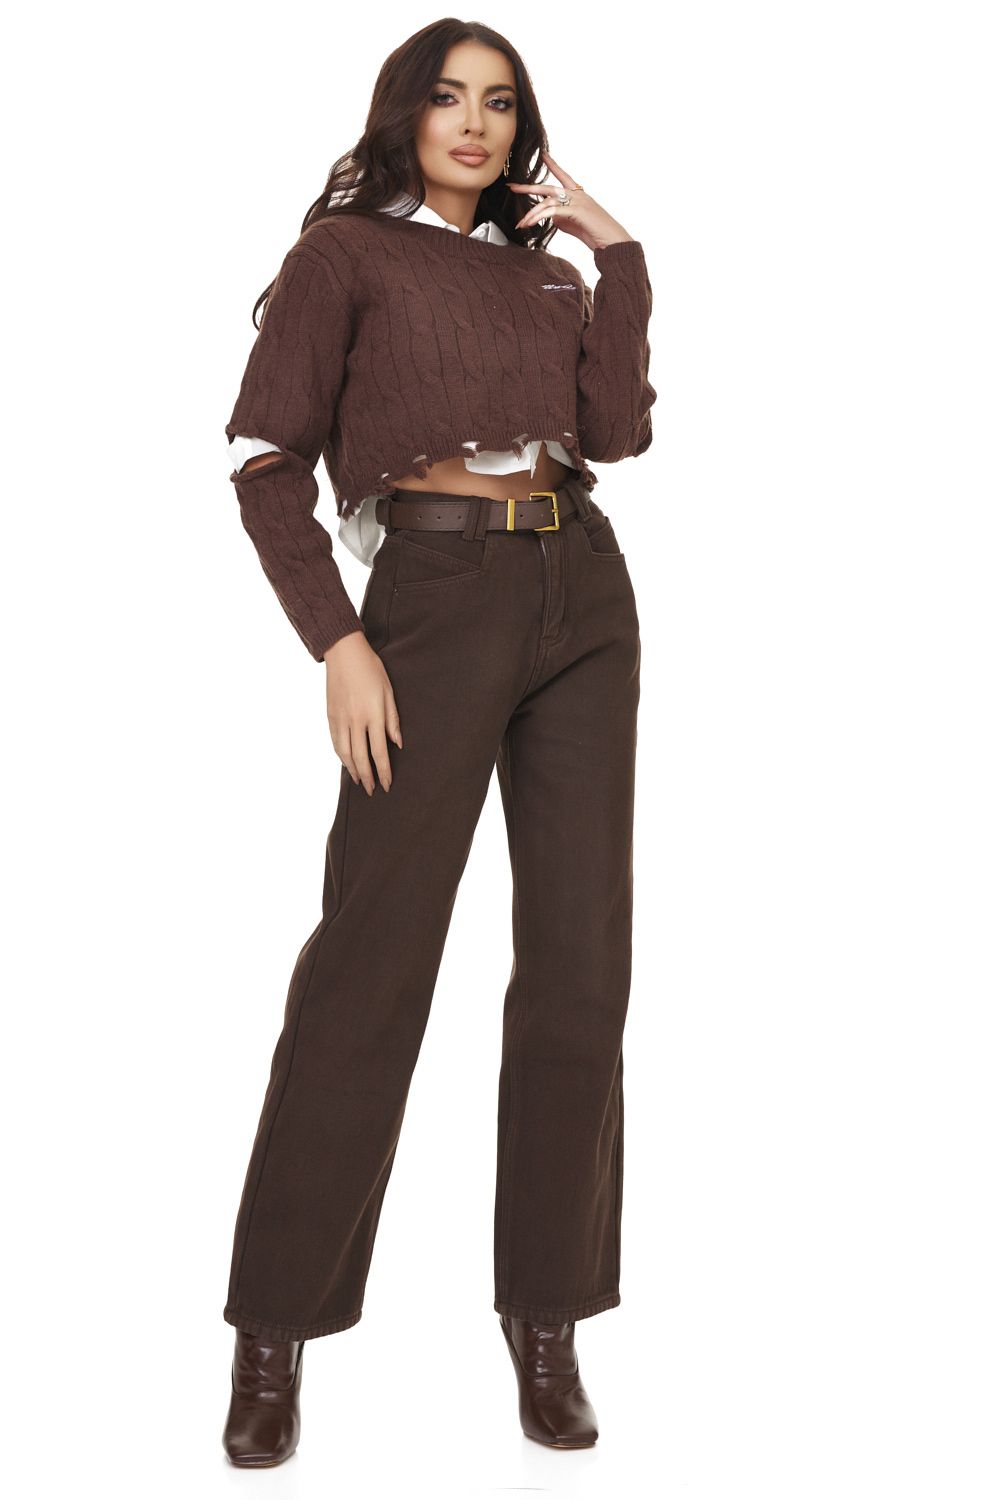 Regely Bogas brown casual women's jeans